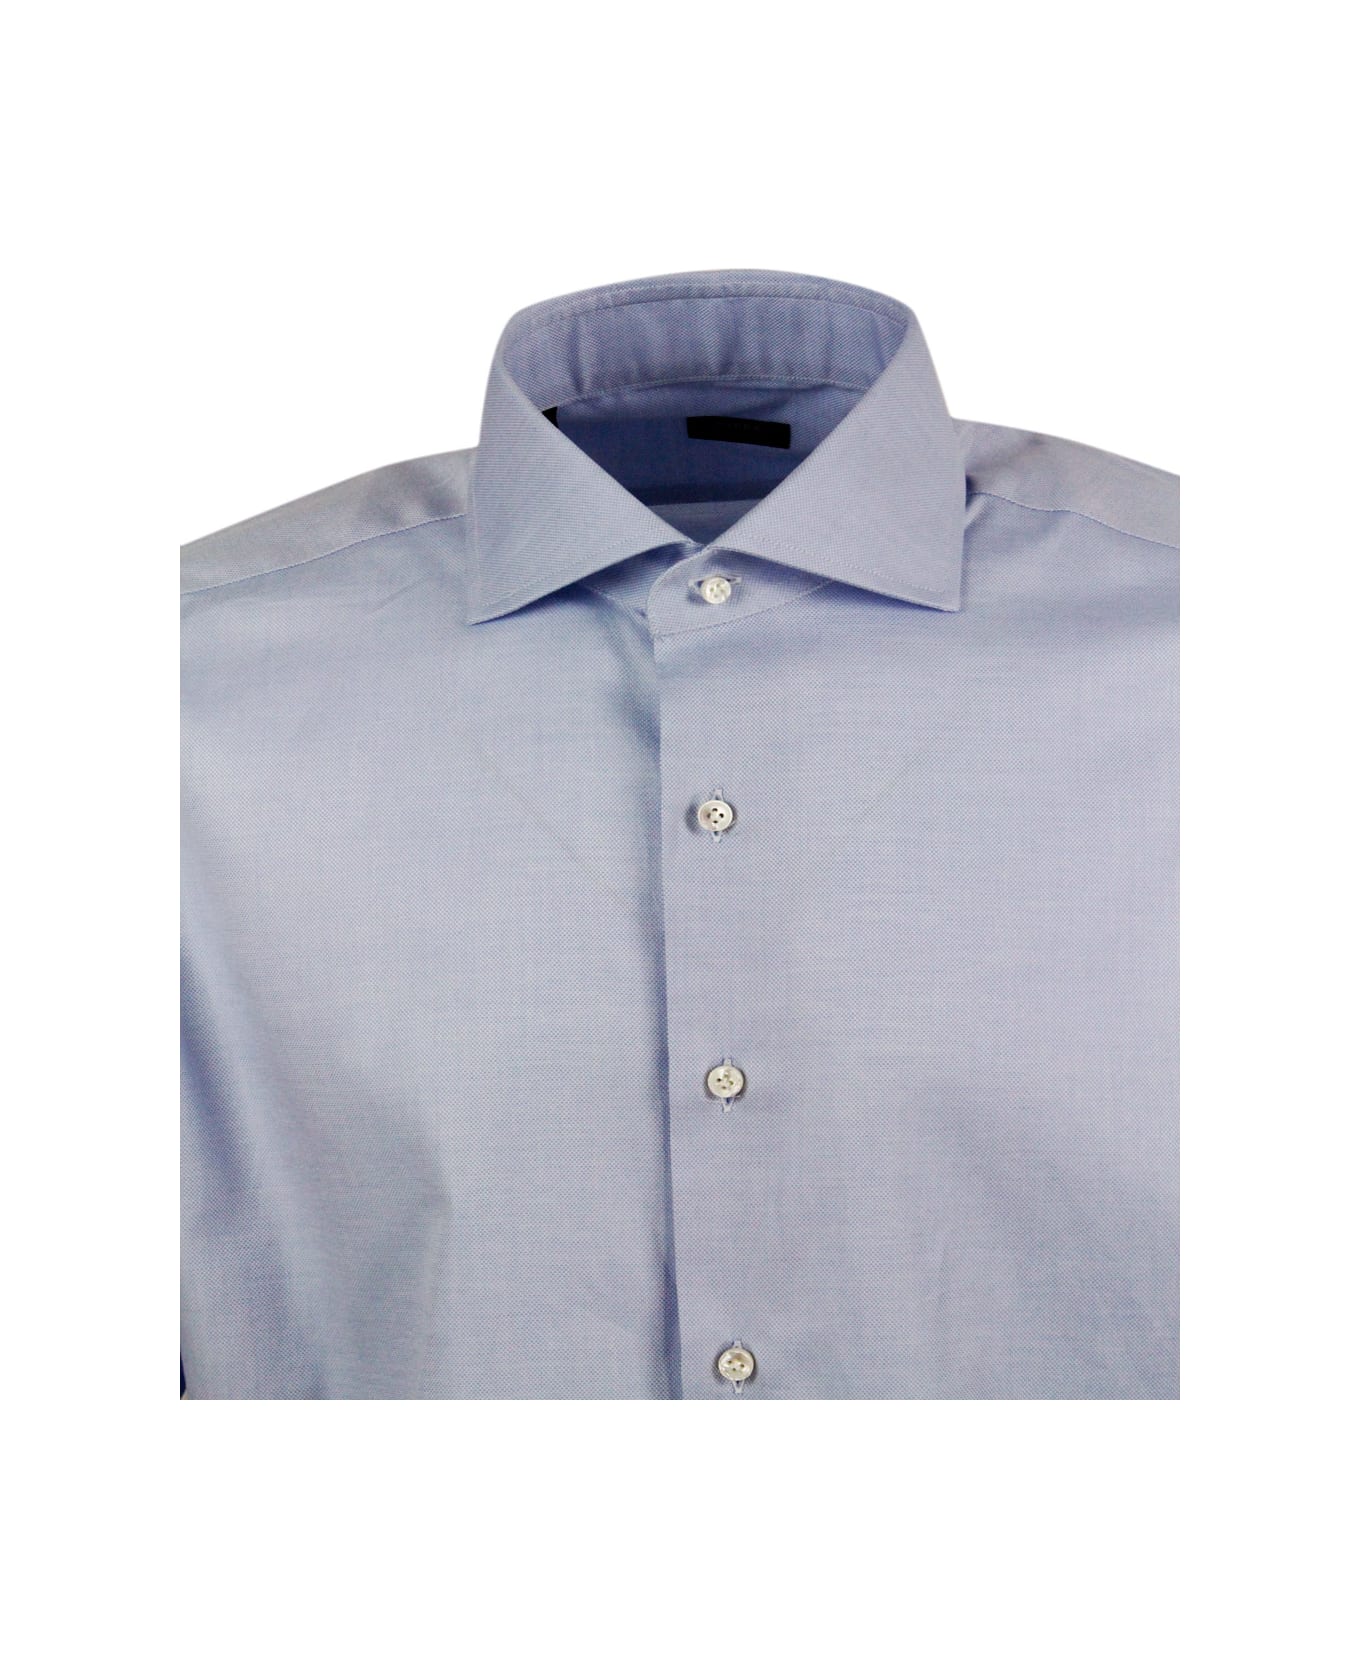 Barba Napoli Slim Fit Shirt In Fine Stretch Honeycomb Cotton, Italian Collar, Hand-sewn Black Label And Mother-of-pearl Buttons - Light Blu シャツ